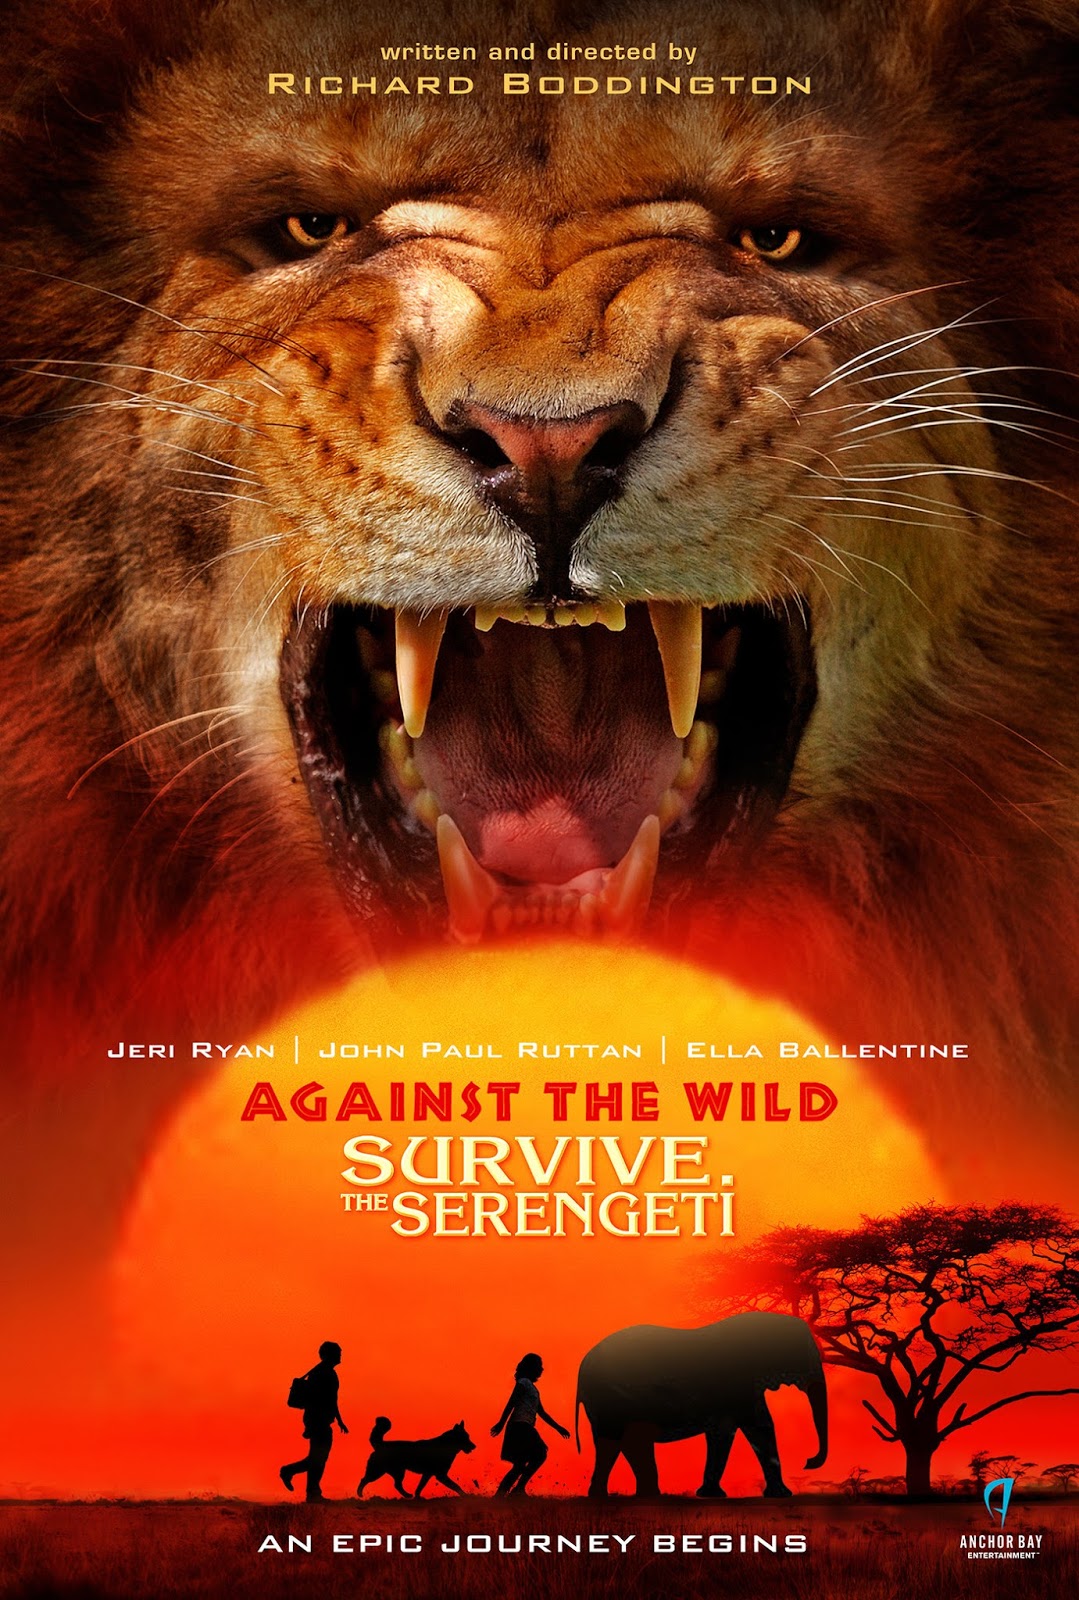 Against the Wild 2: Survive the Serengeti 2016